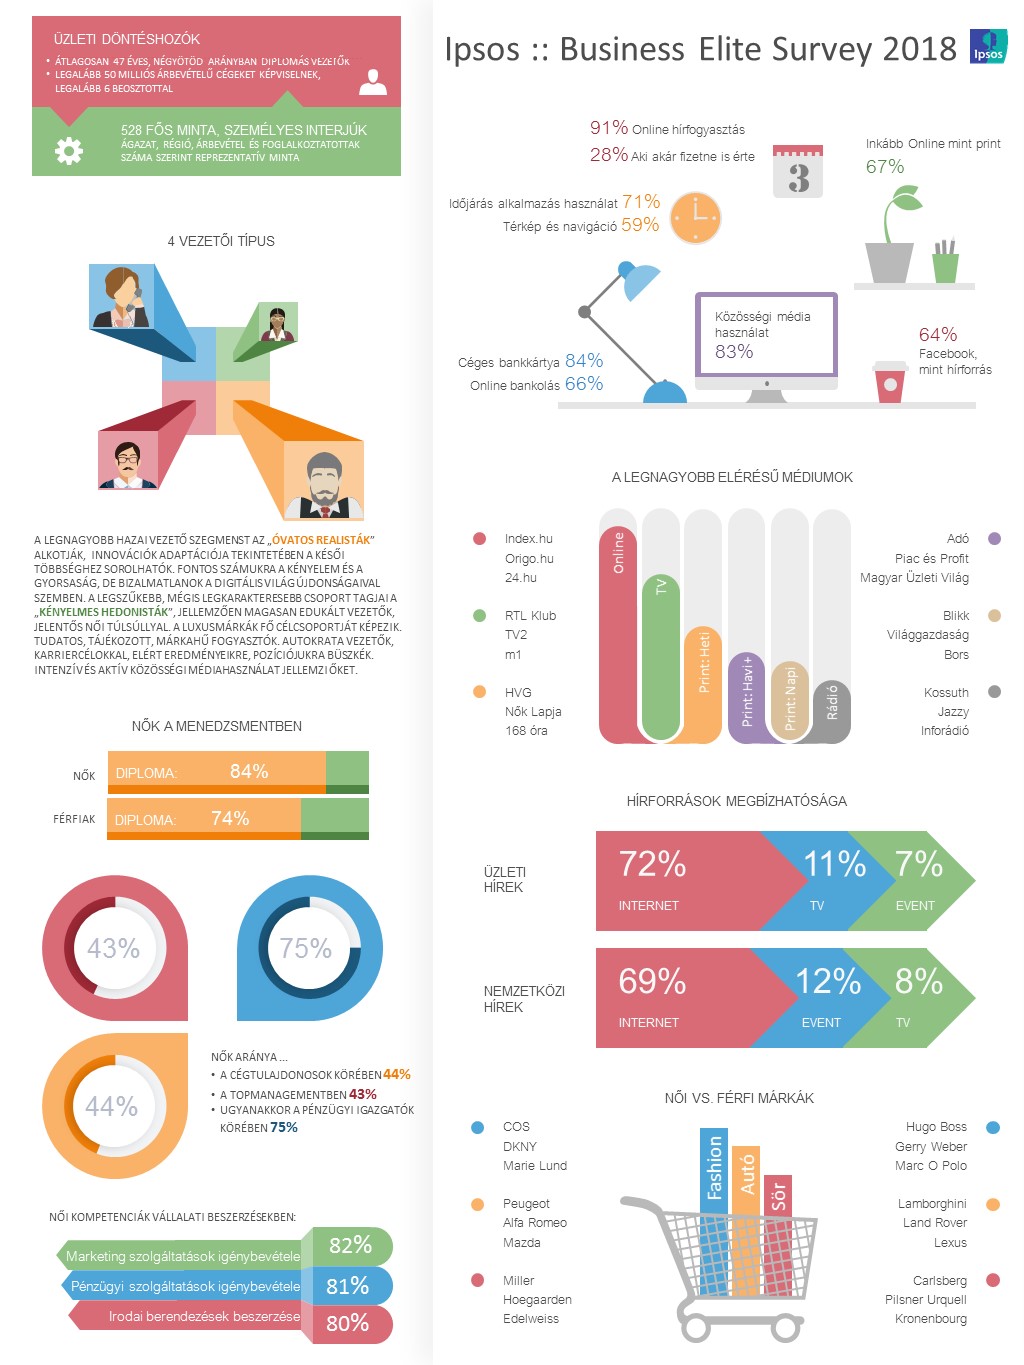 Ipsos BES 2018 one-pager